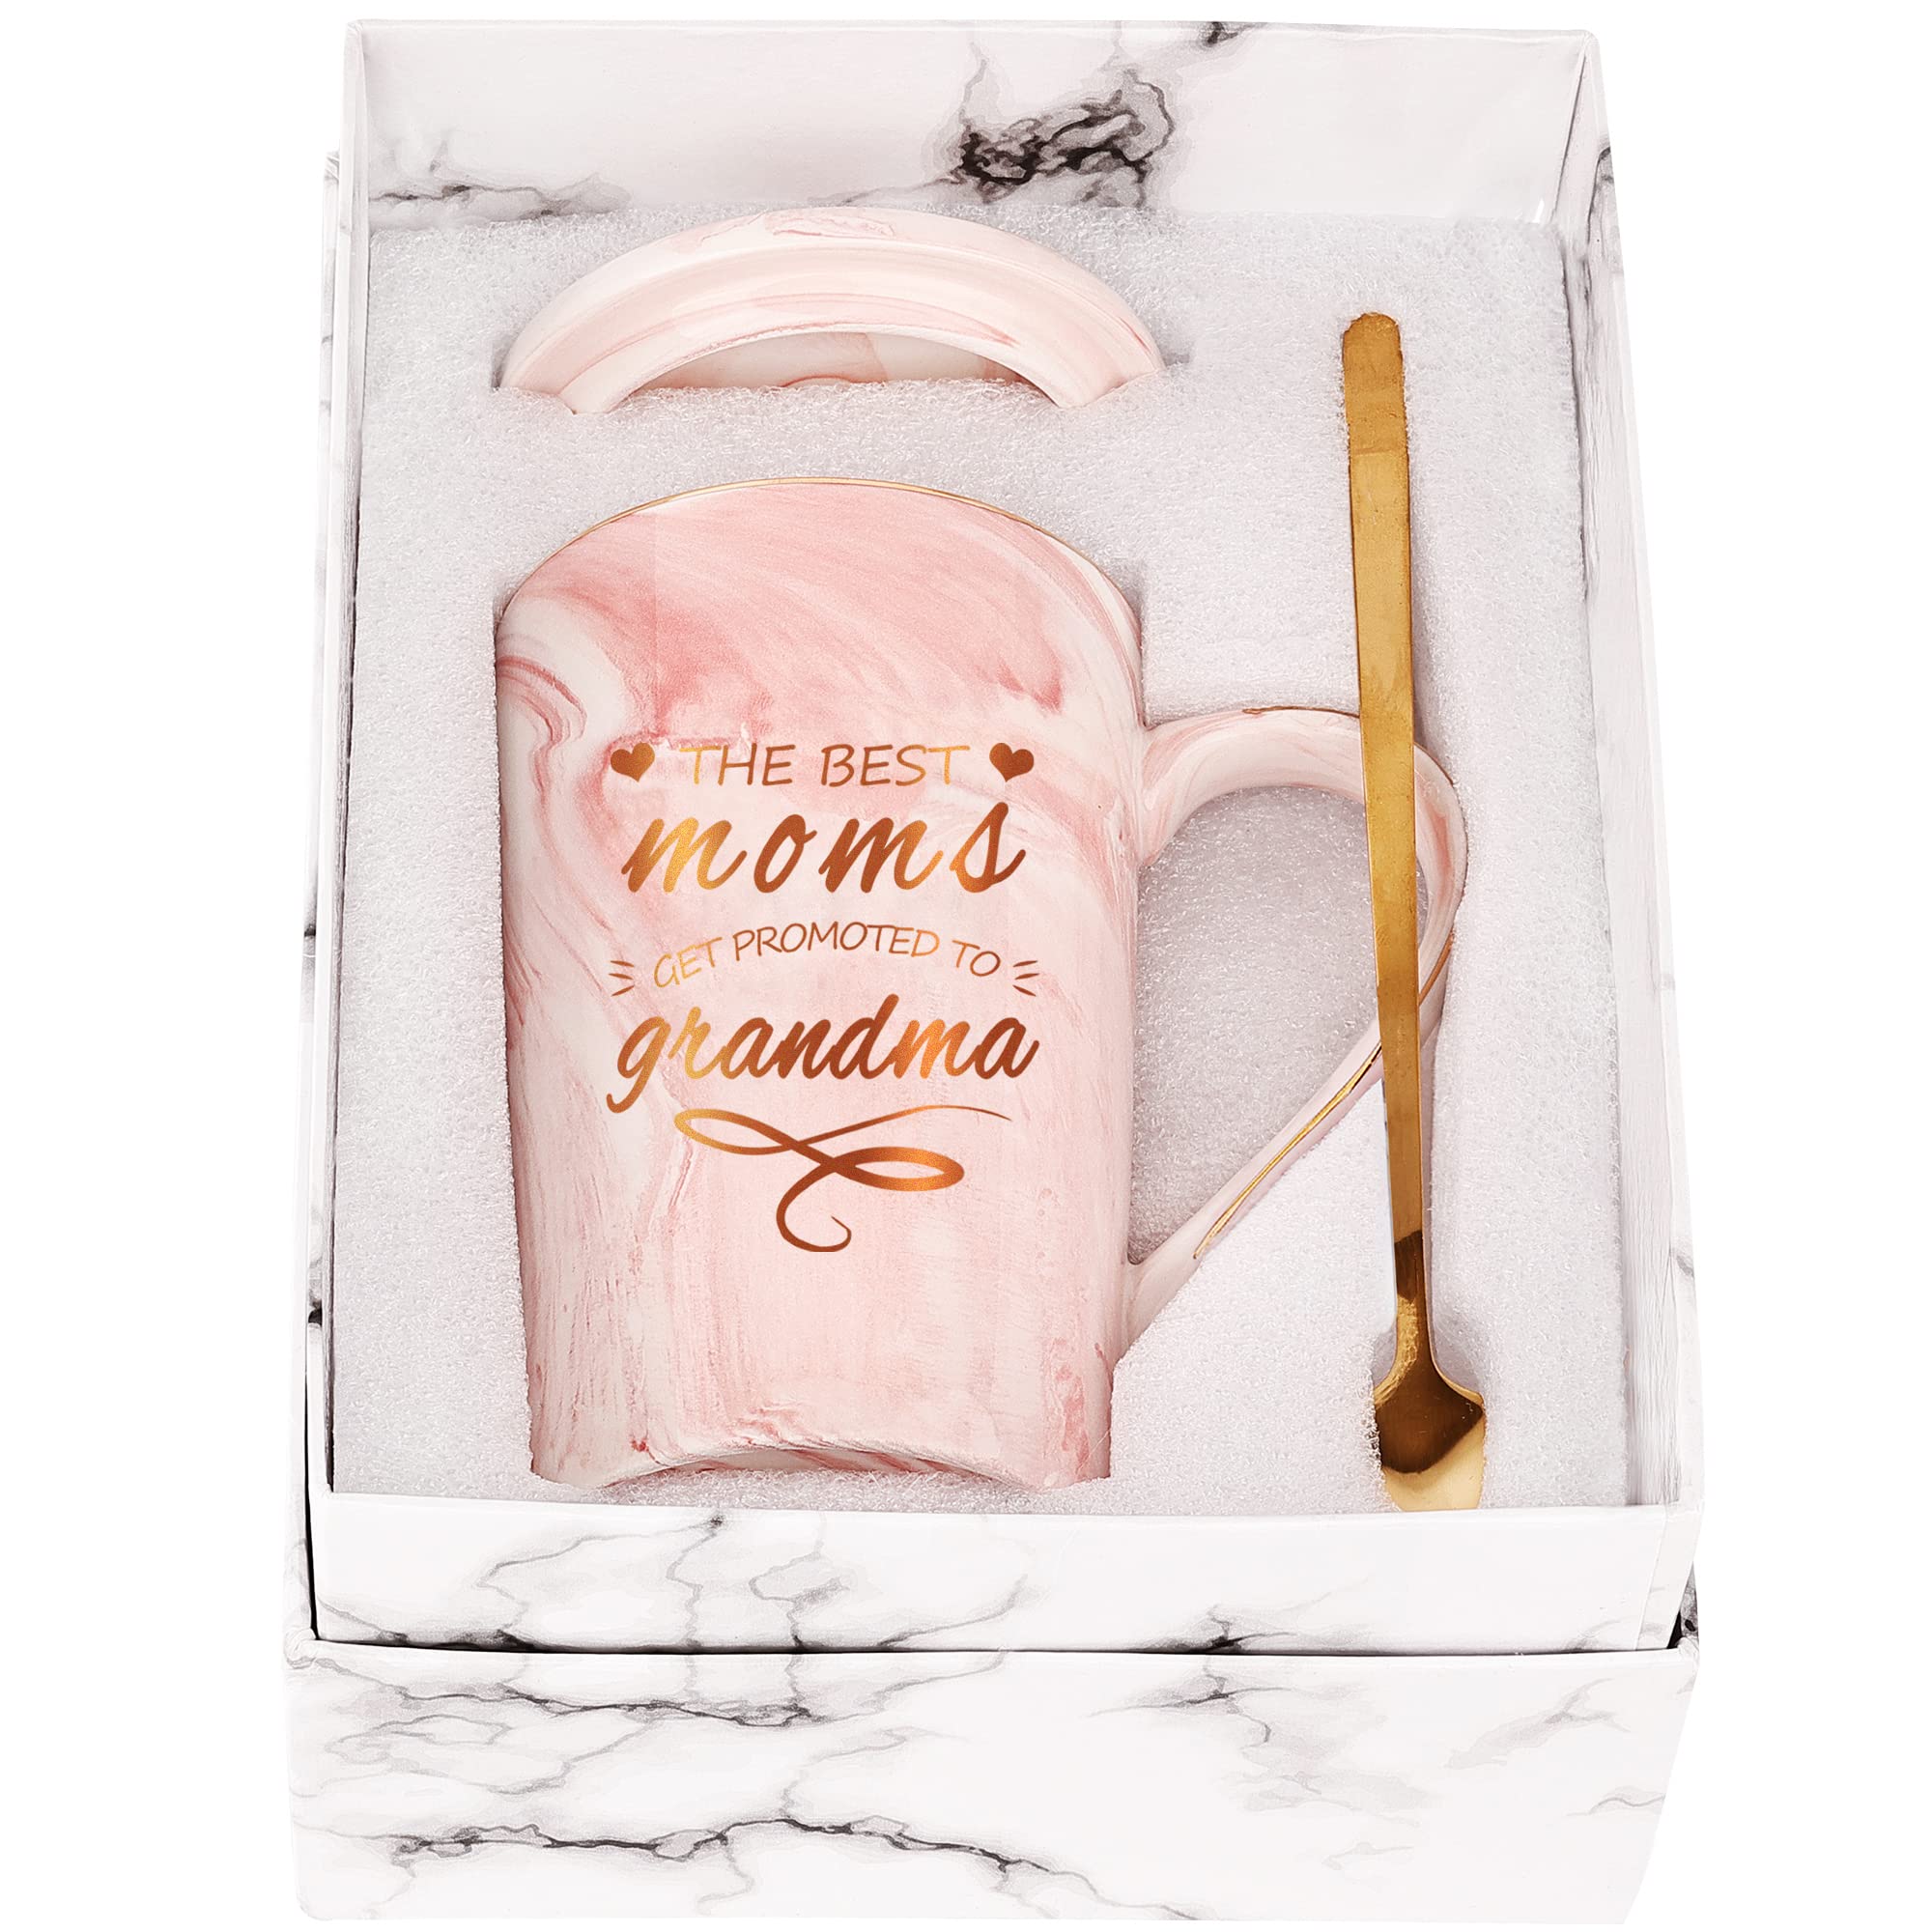 The Best Moms Get Promoted To Grandma Mug New Grandma Mug Gift for Grandma Grandma Gift for Mothers Day from Granddaughter Grandson Mug Birthday Gift for Grandma 14 Ounce Gift Box Pink